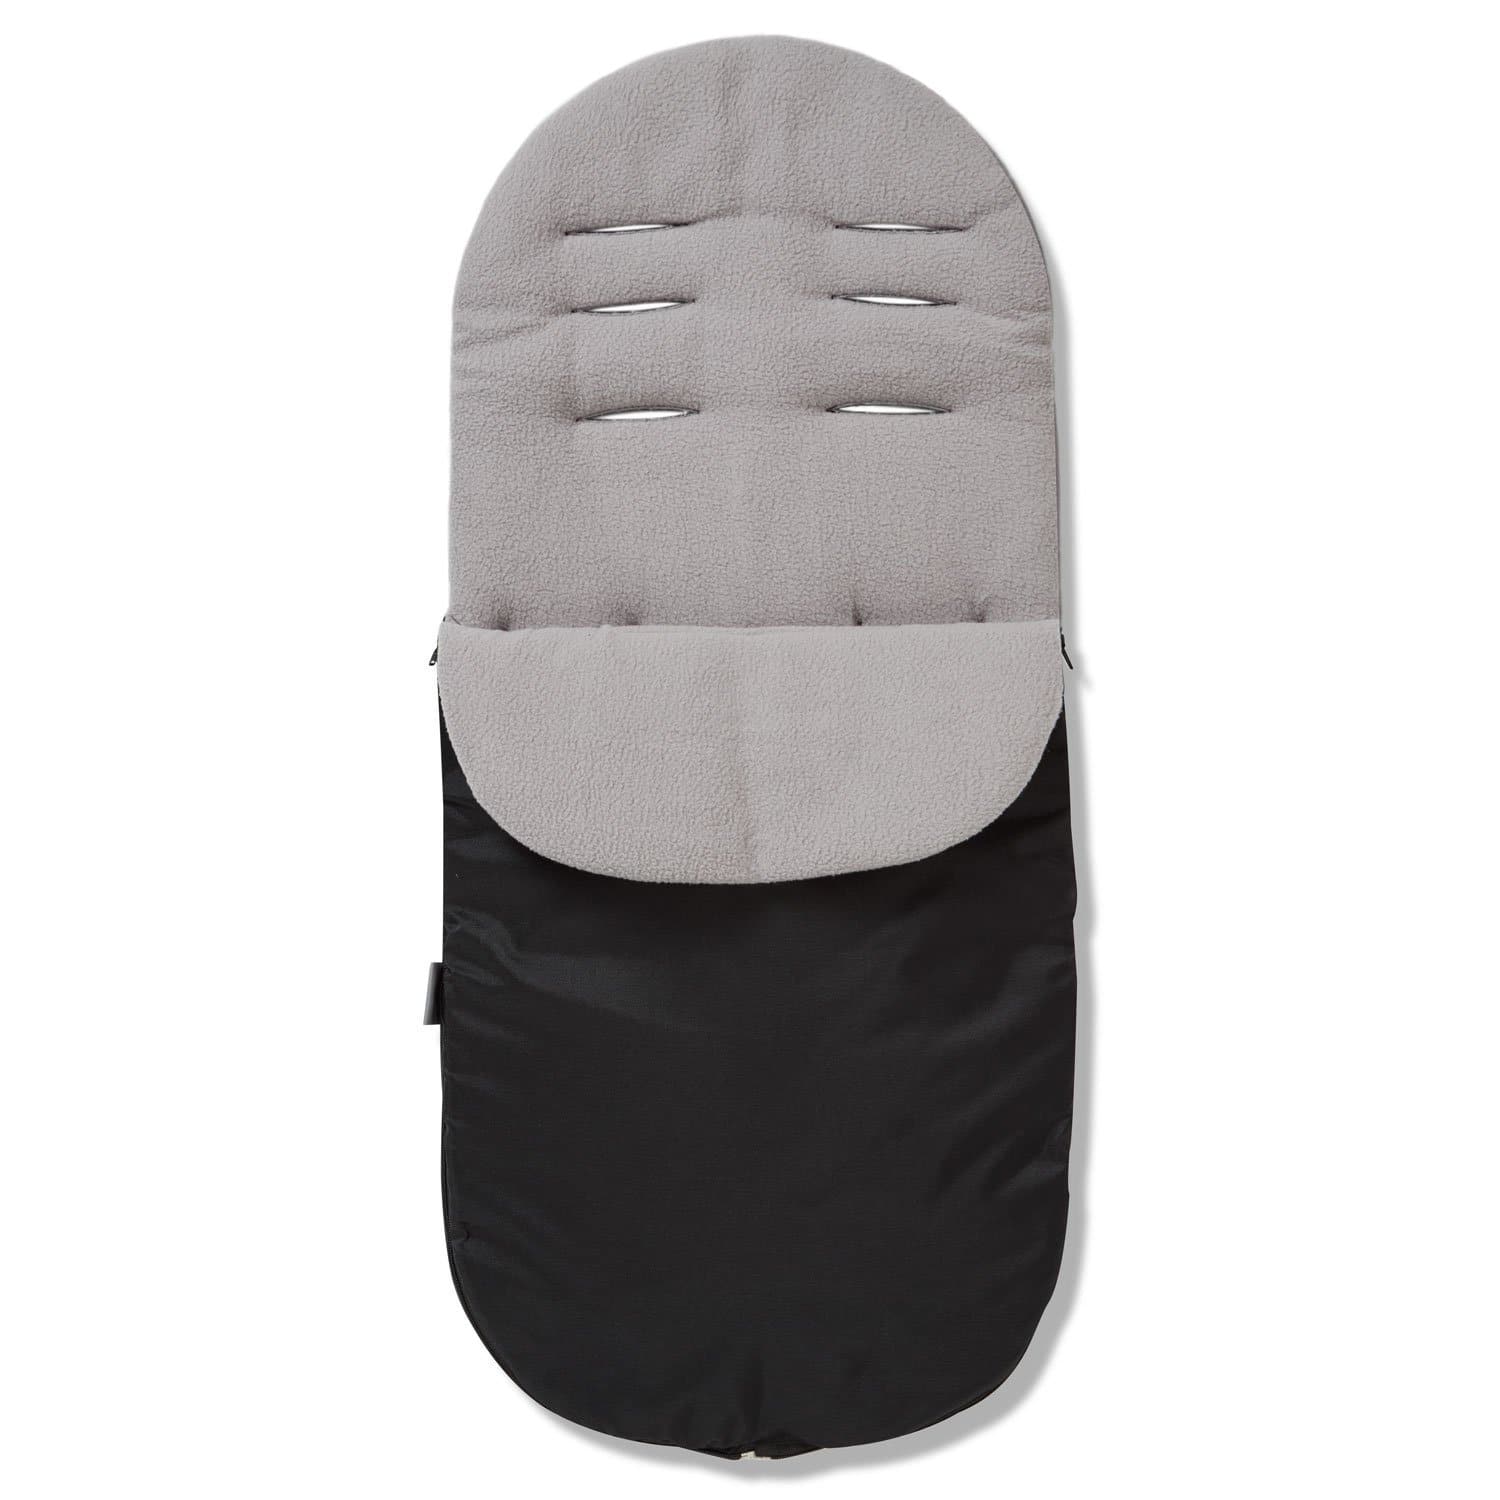 Footmuff / Cosy Toes Compatible with Quax - Grey / Fits All Models | For Your Little One